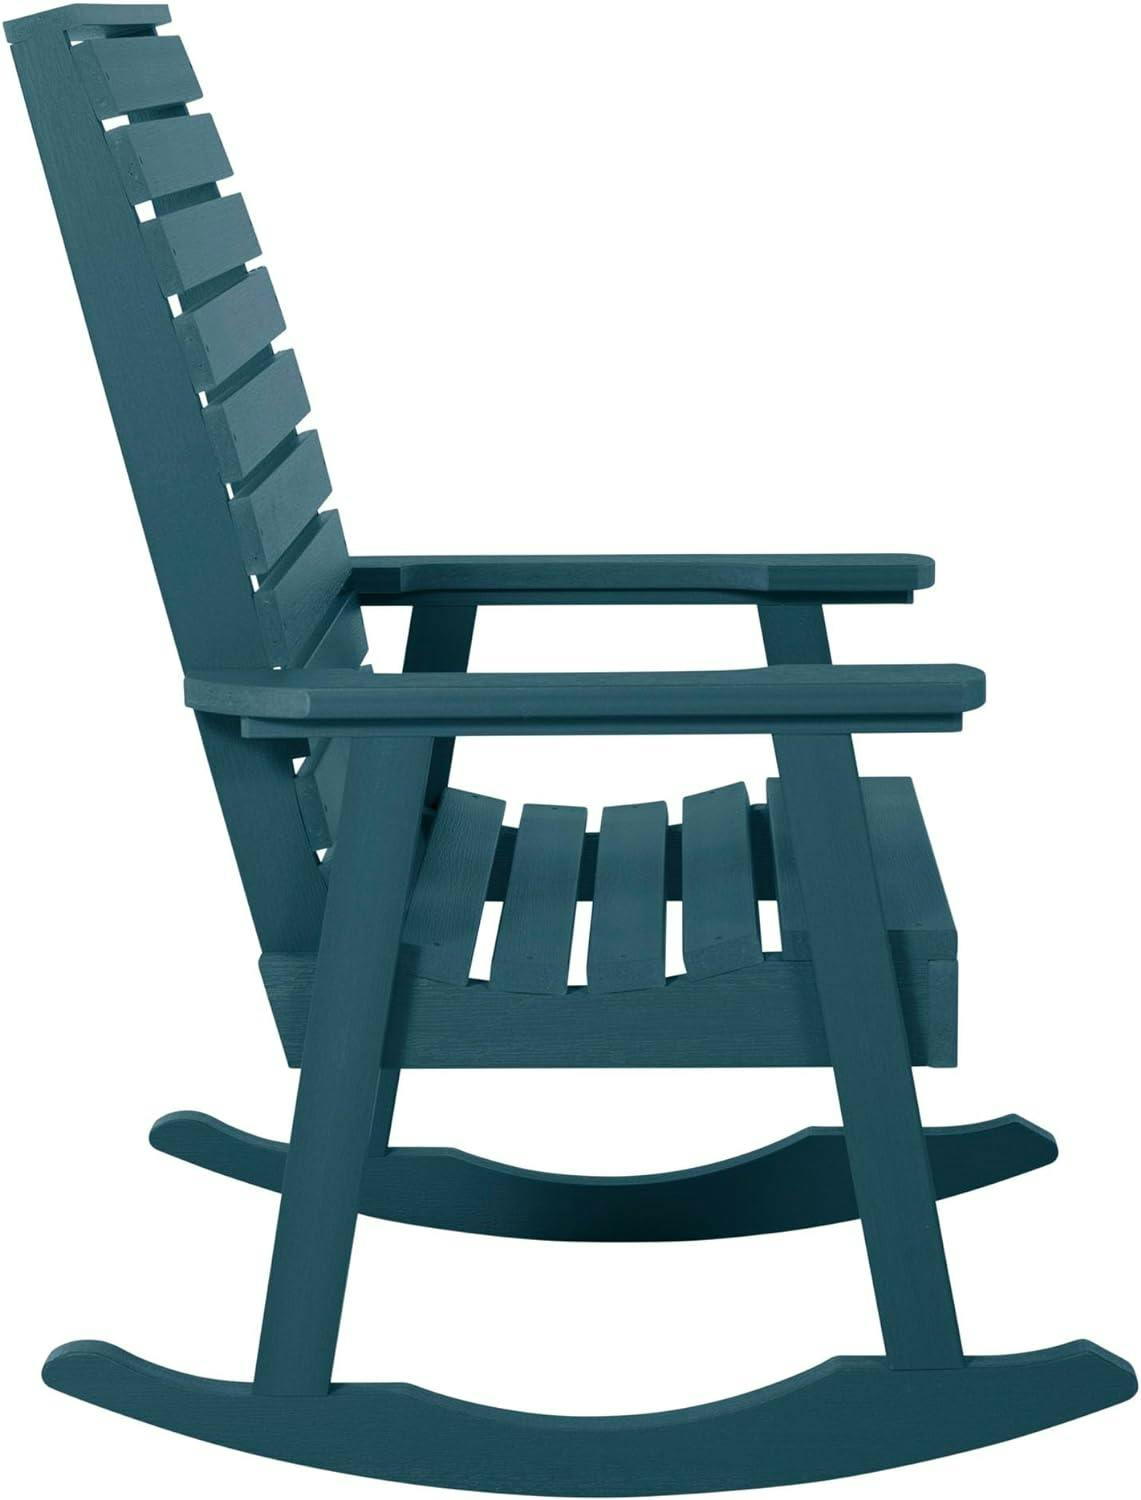 Nantucket Blue Weatherly Rocking Patio Chair with High-Grade Poly Lumber